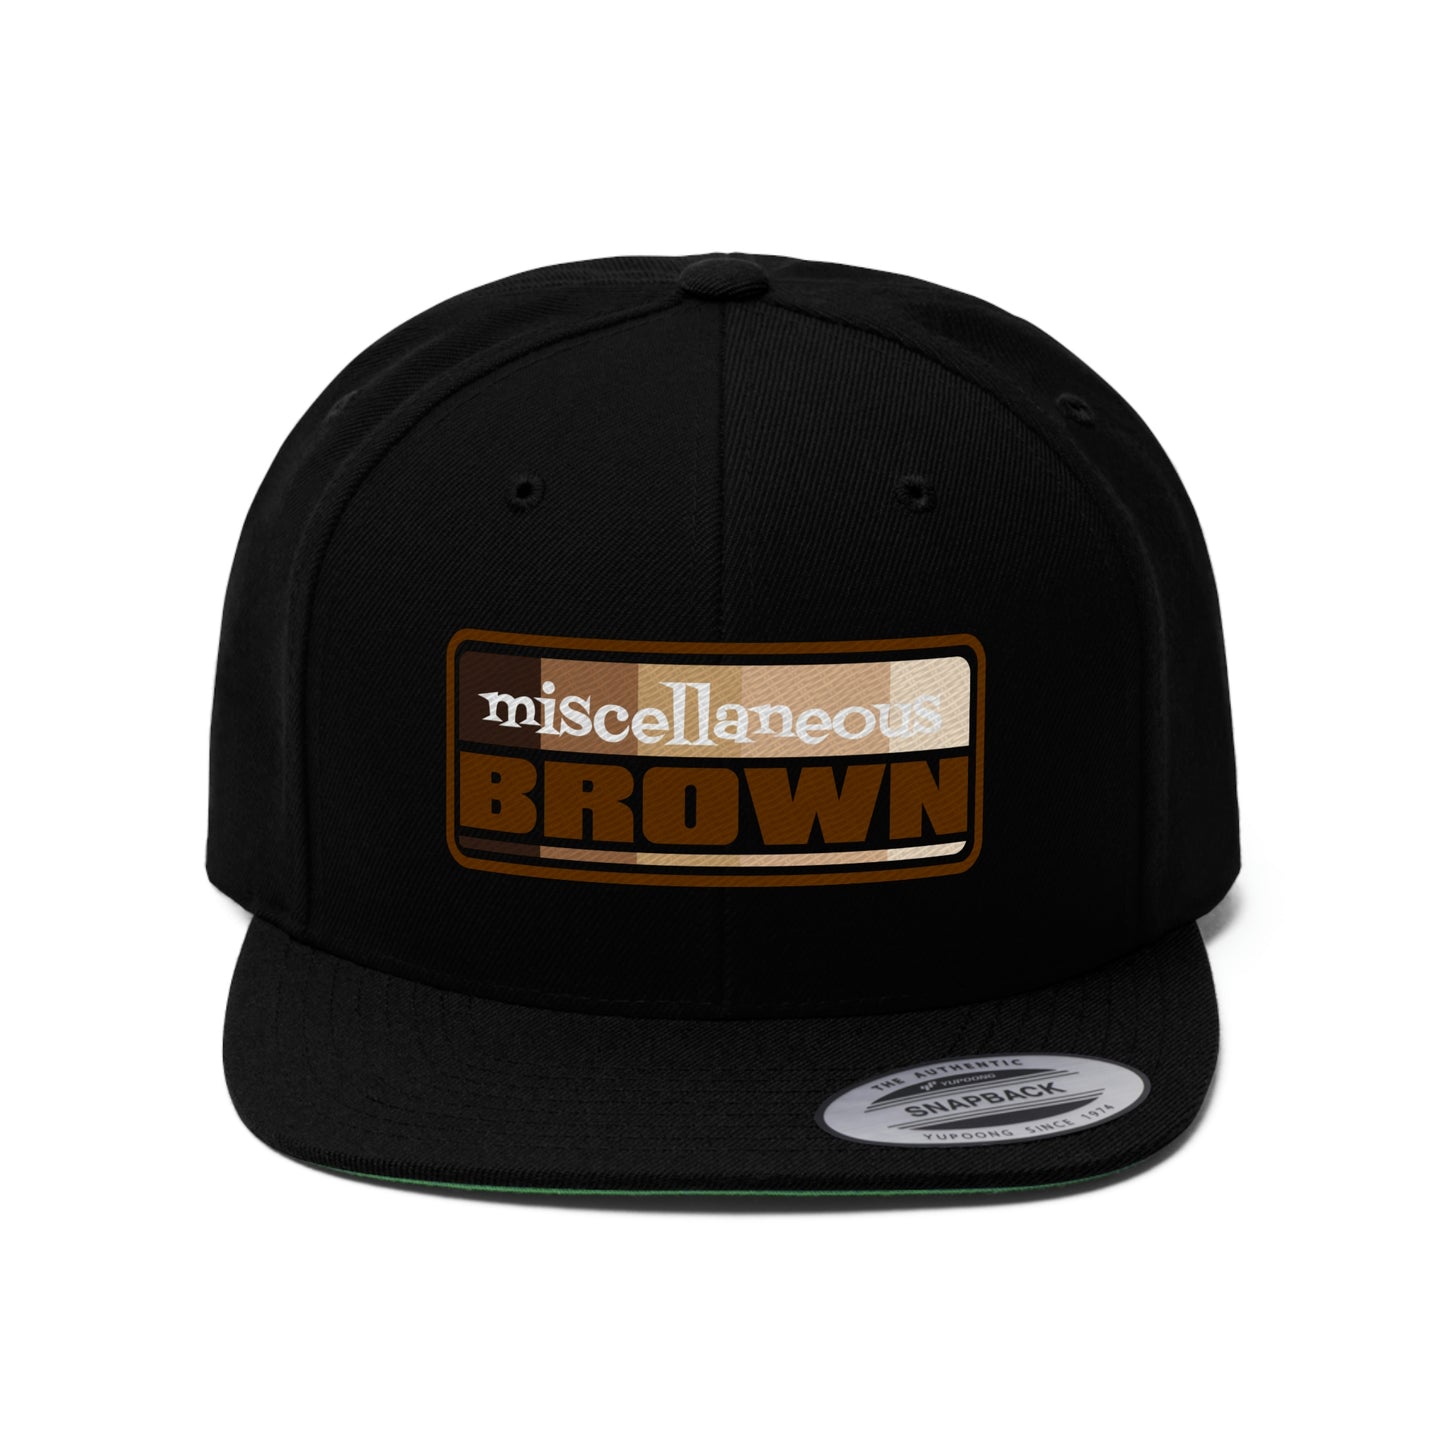 Miscellaneous Brown Comedy Special Unisex Flat Bill Hat